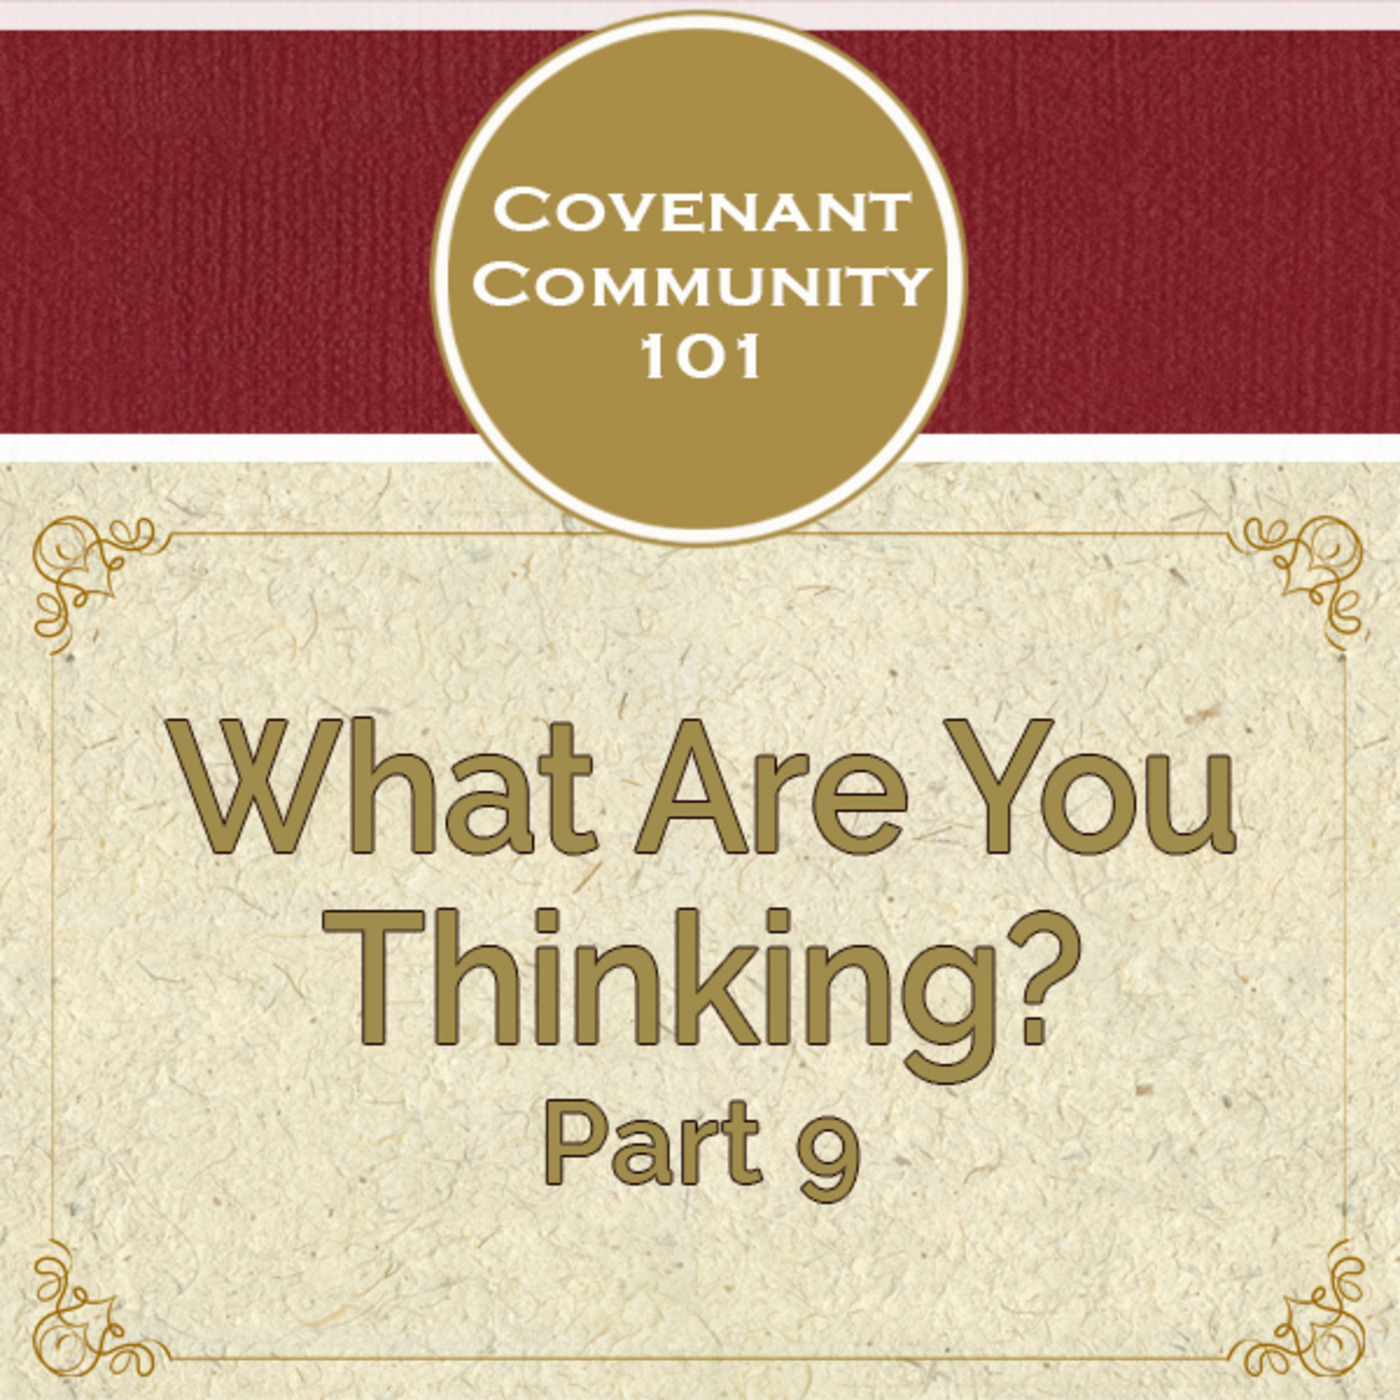 Covenant Community 101: What Are You Thinking? - Part 9